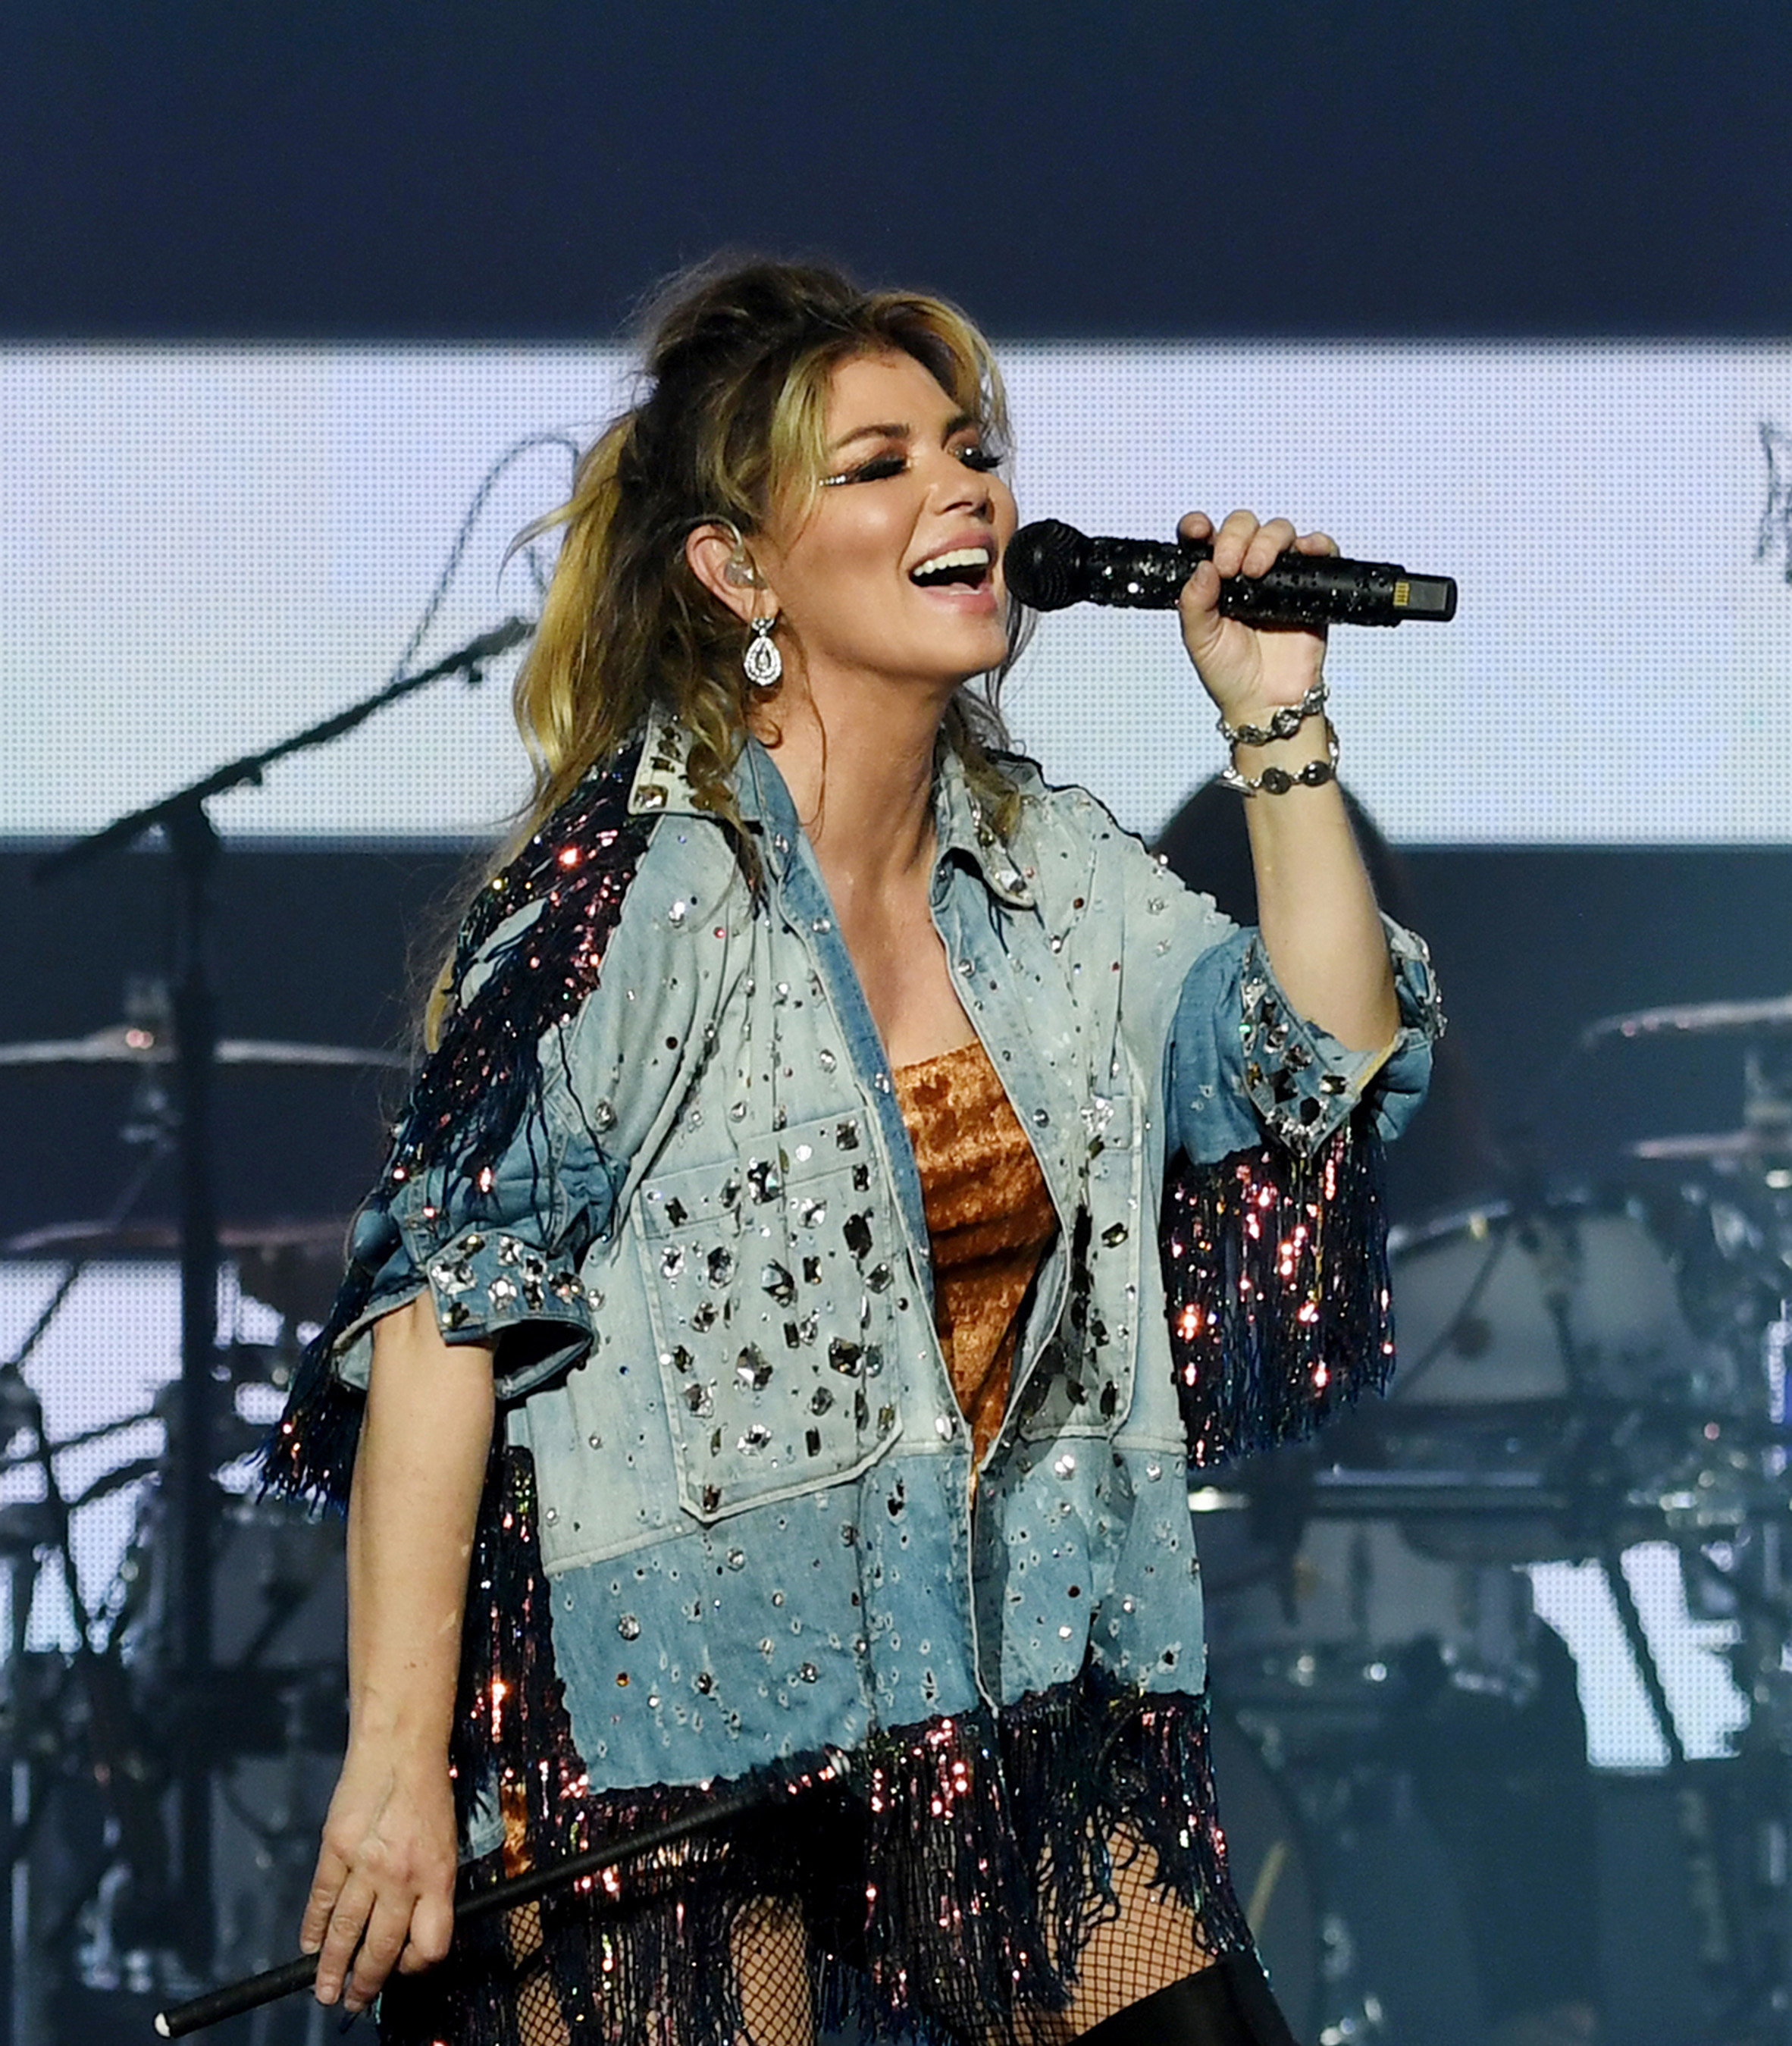 Global Icon Shania Twain Launches Shania Twain “Let’s Go!” The Las Vegas Residency To Sold-out Crowds Opening Week At Zappos Theater At Planet Hollywood Resort & Casino